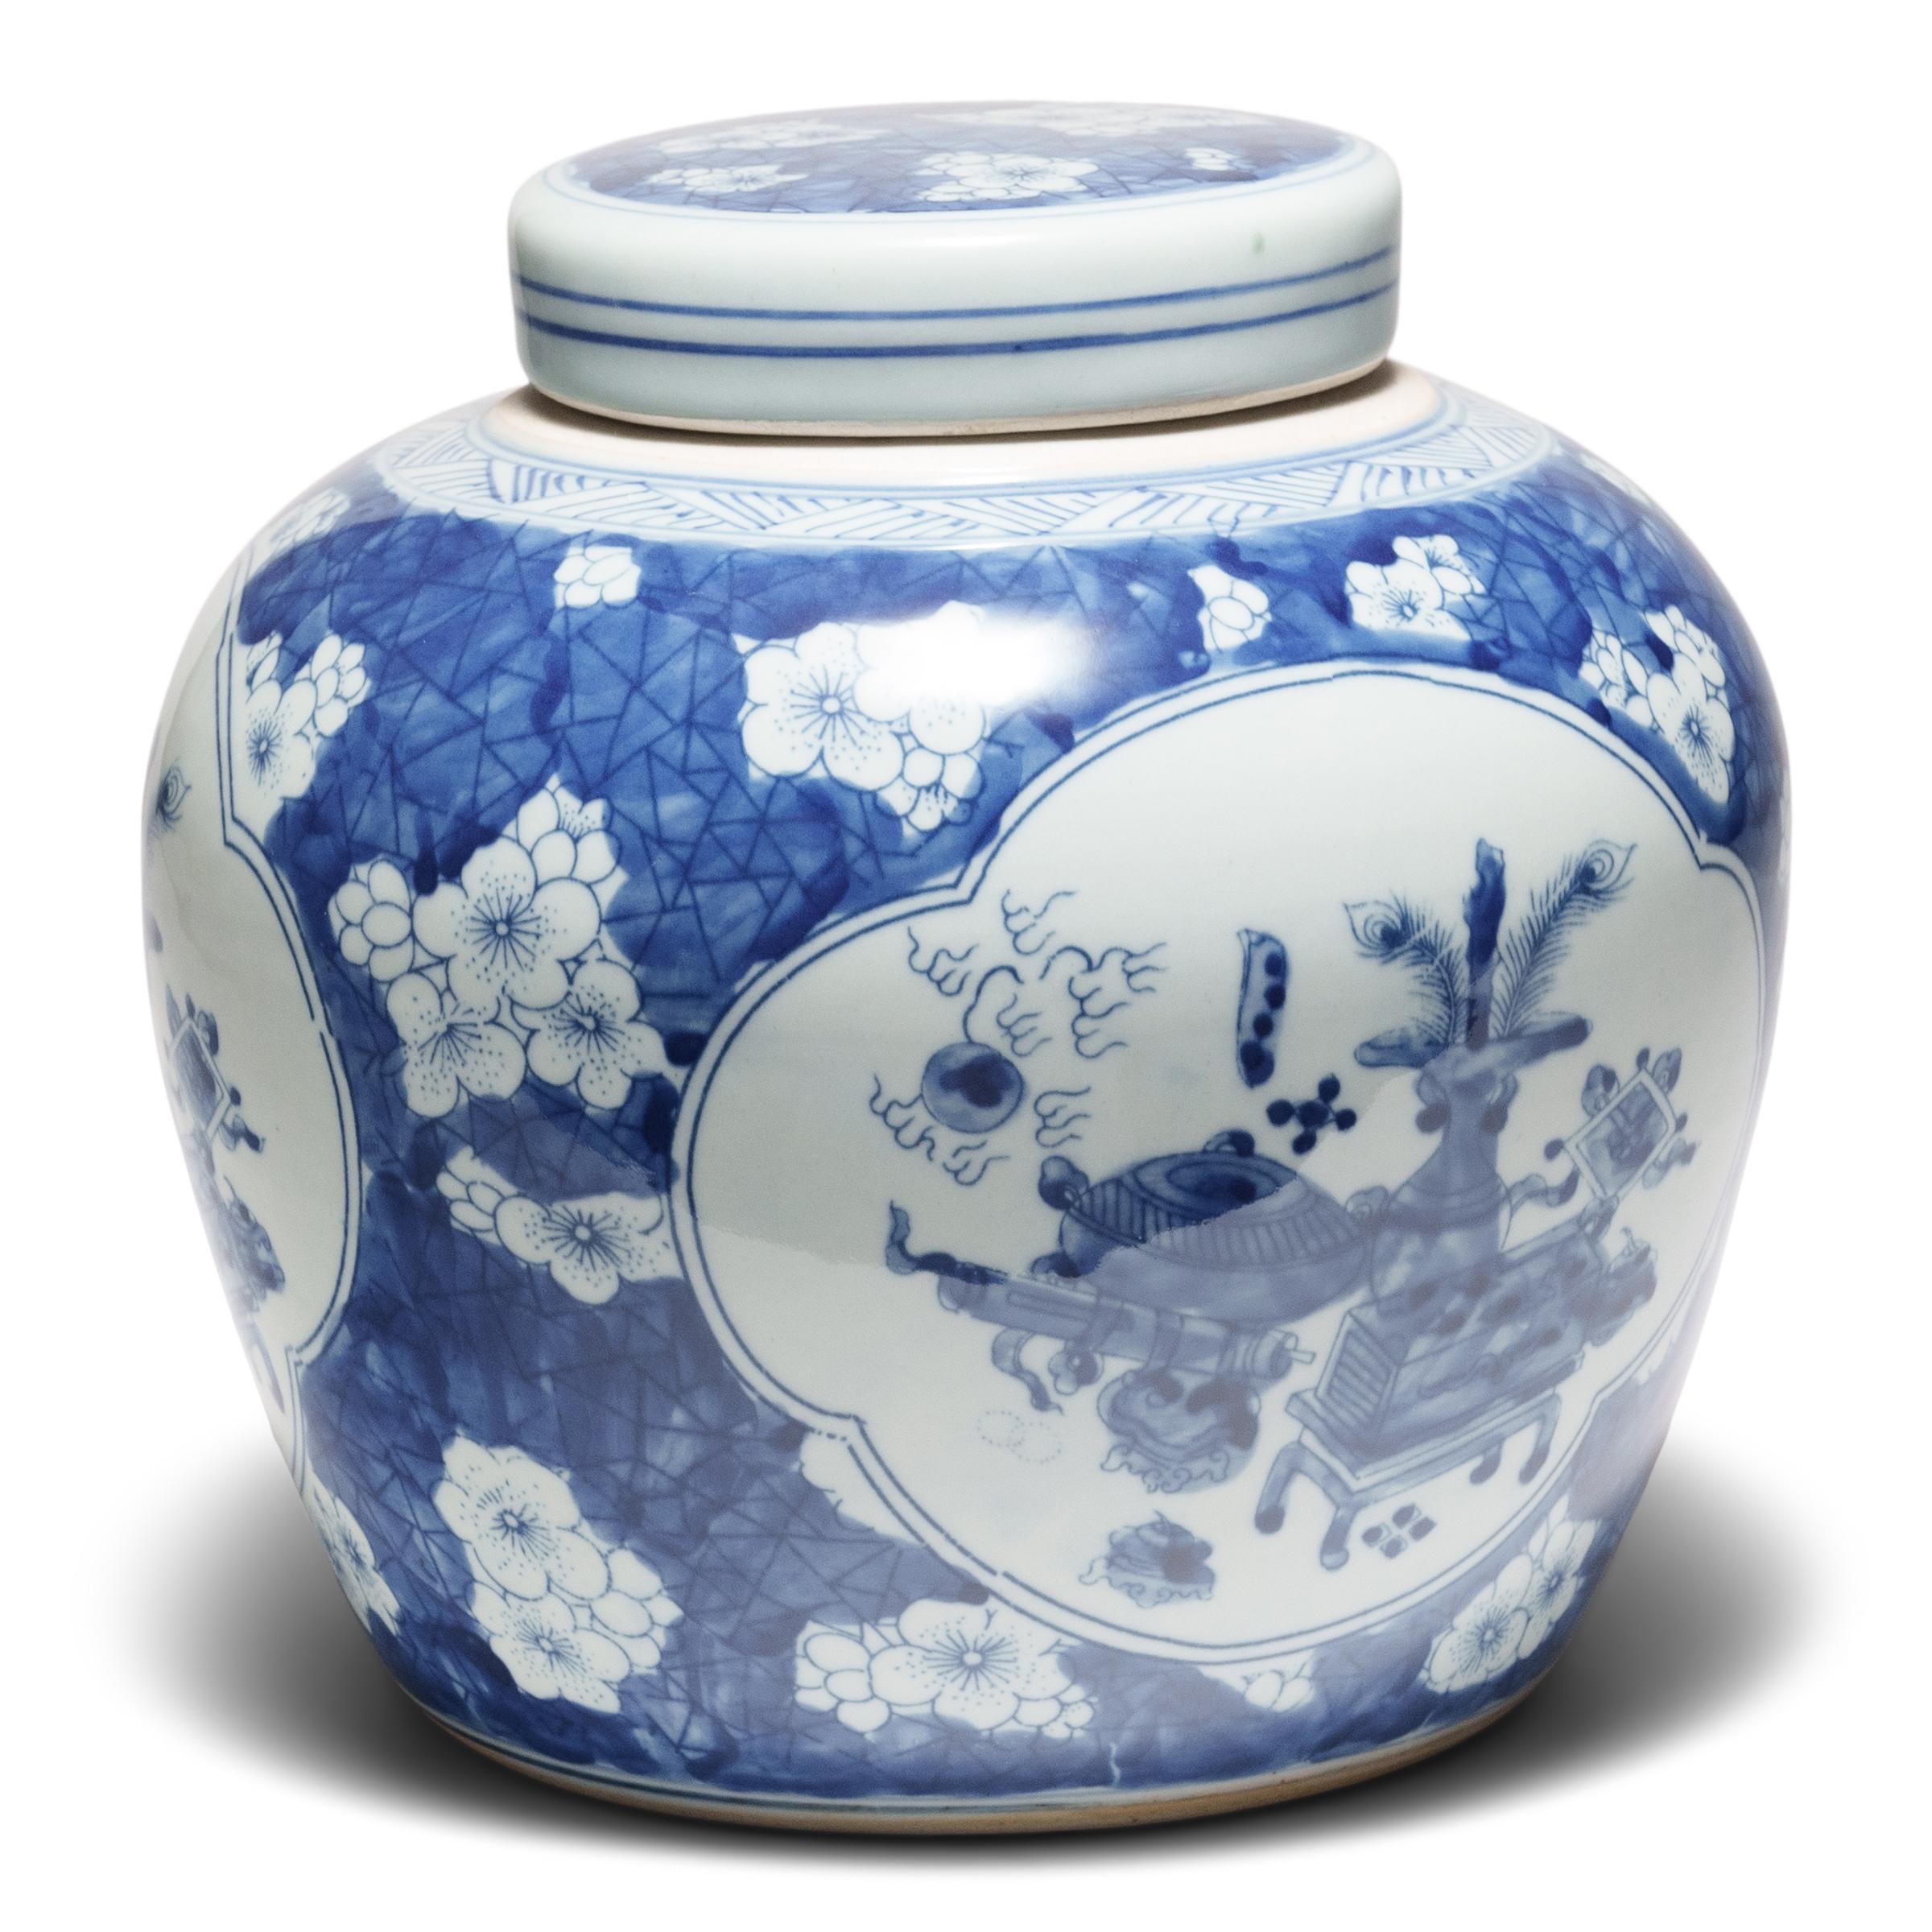 This porcelain storage jar has a rounded, tapered form and is brightly glazed in the classic blue-and-white manner. The jar is decorated on three sides with cartouches enclosing still life vignettes of scholars' objects. Among the precious objects